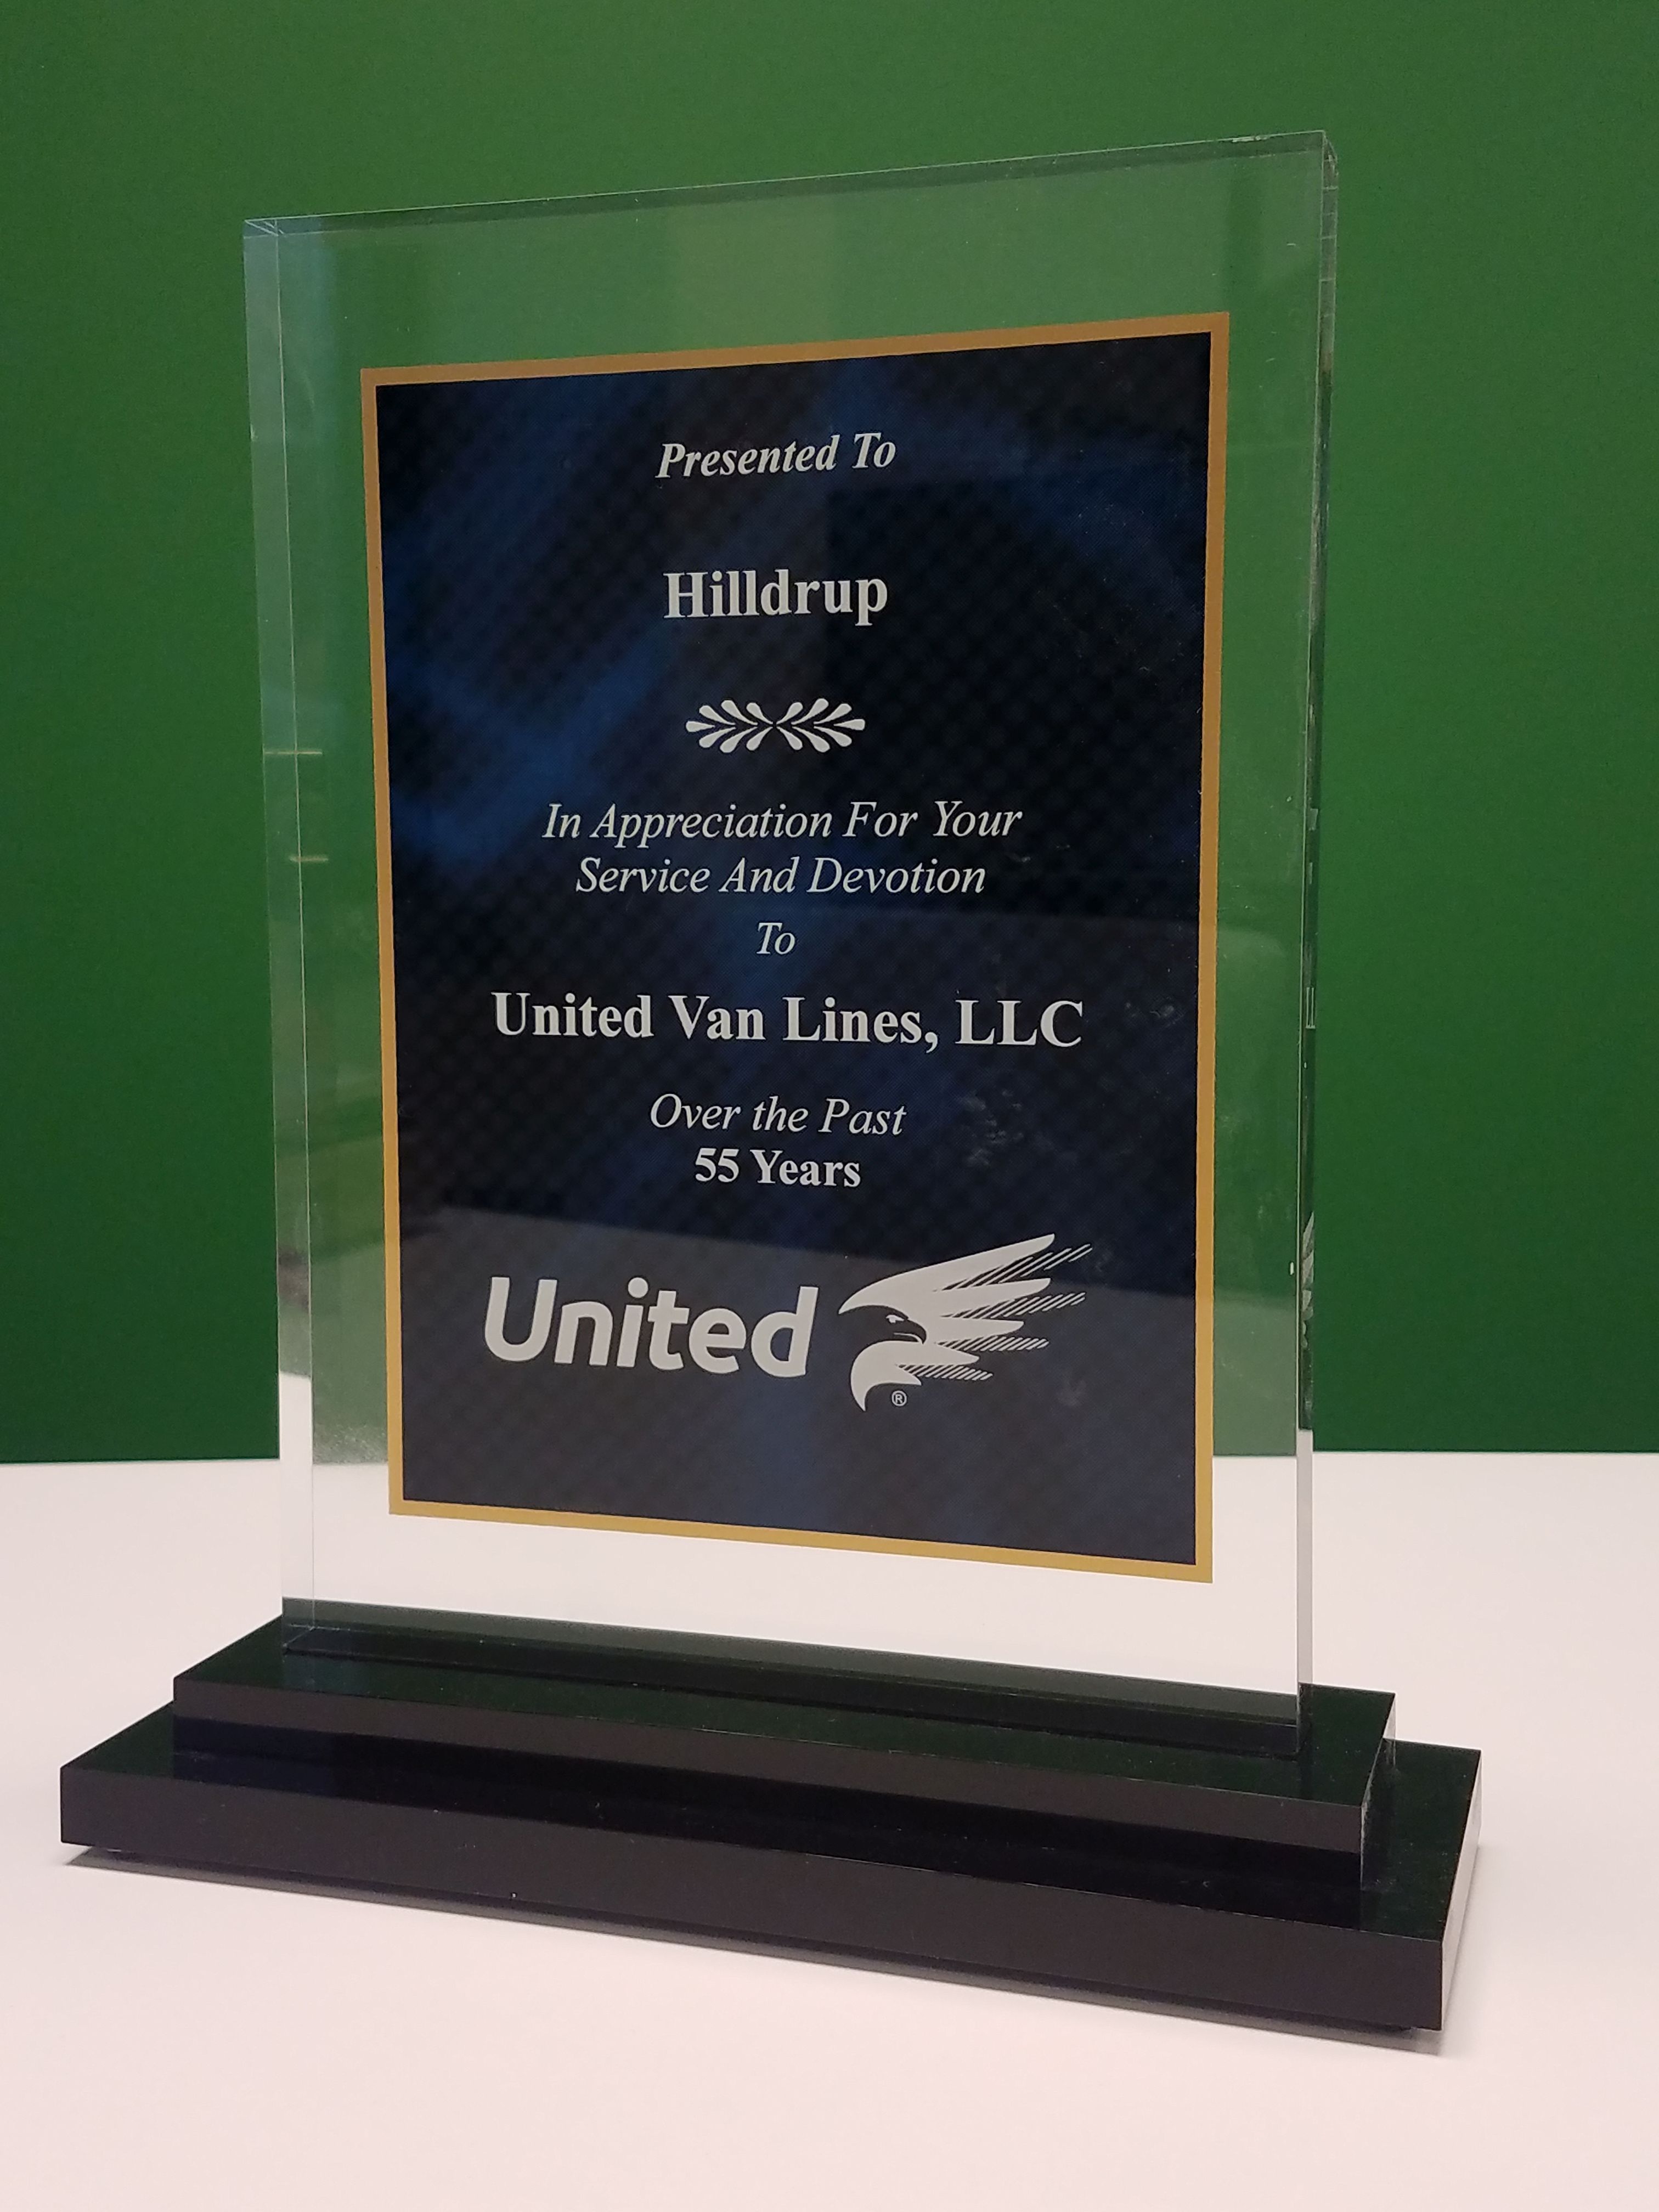 Hilldrup United Van Lines truck 55 years ago